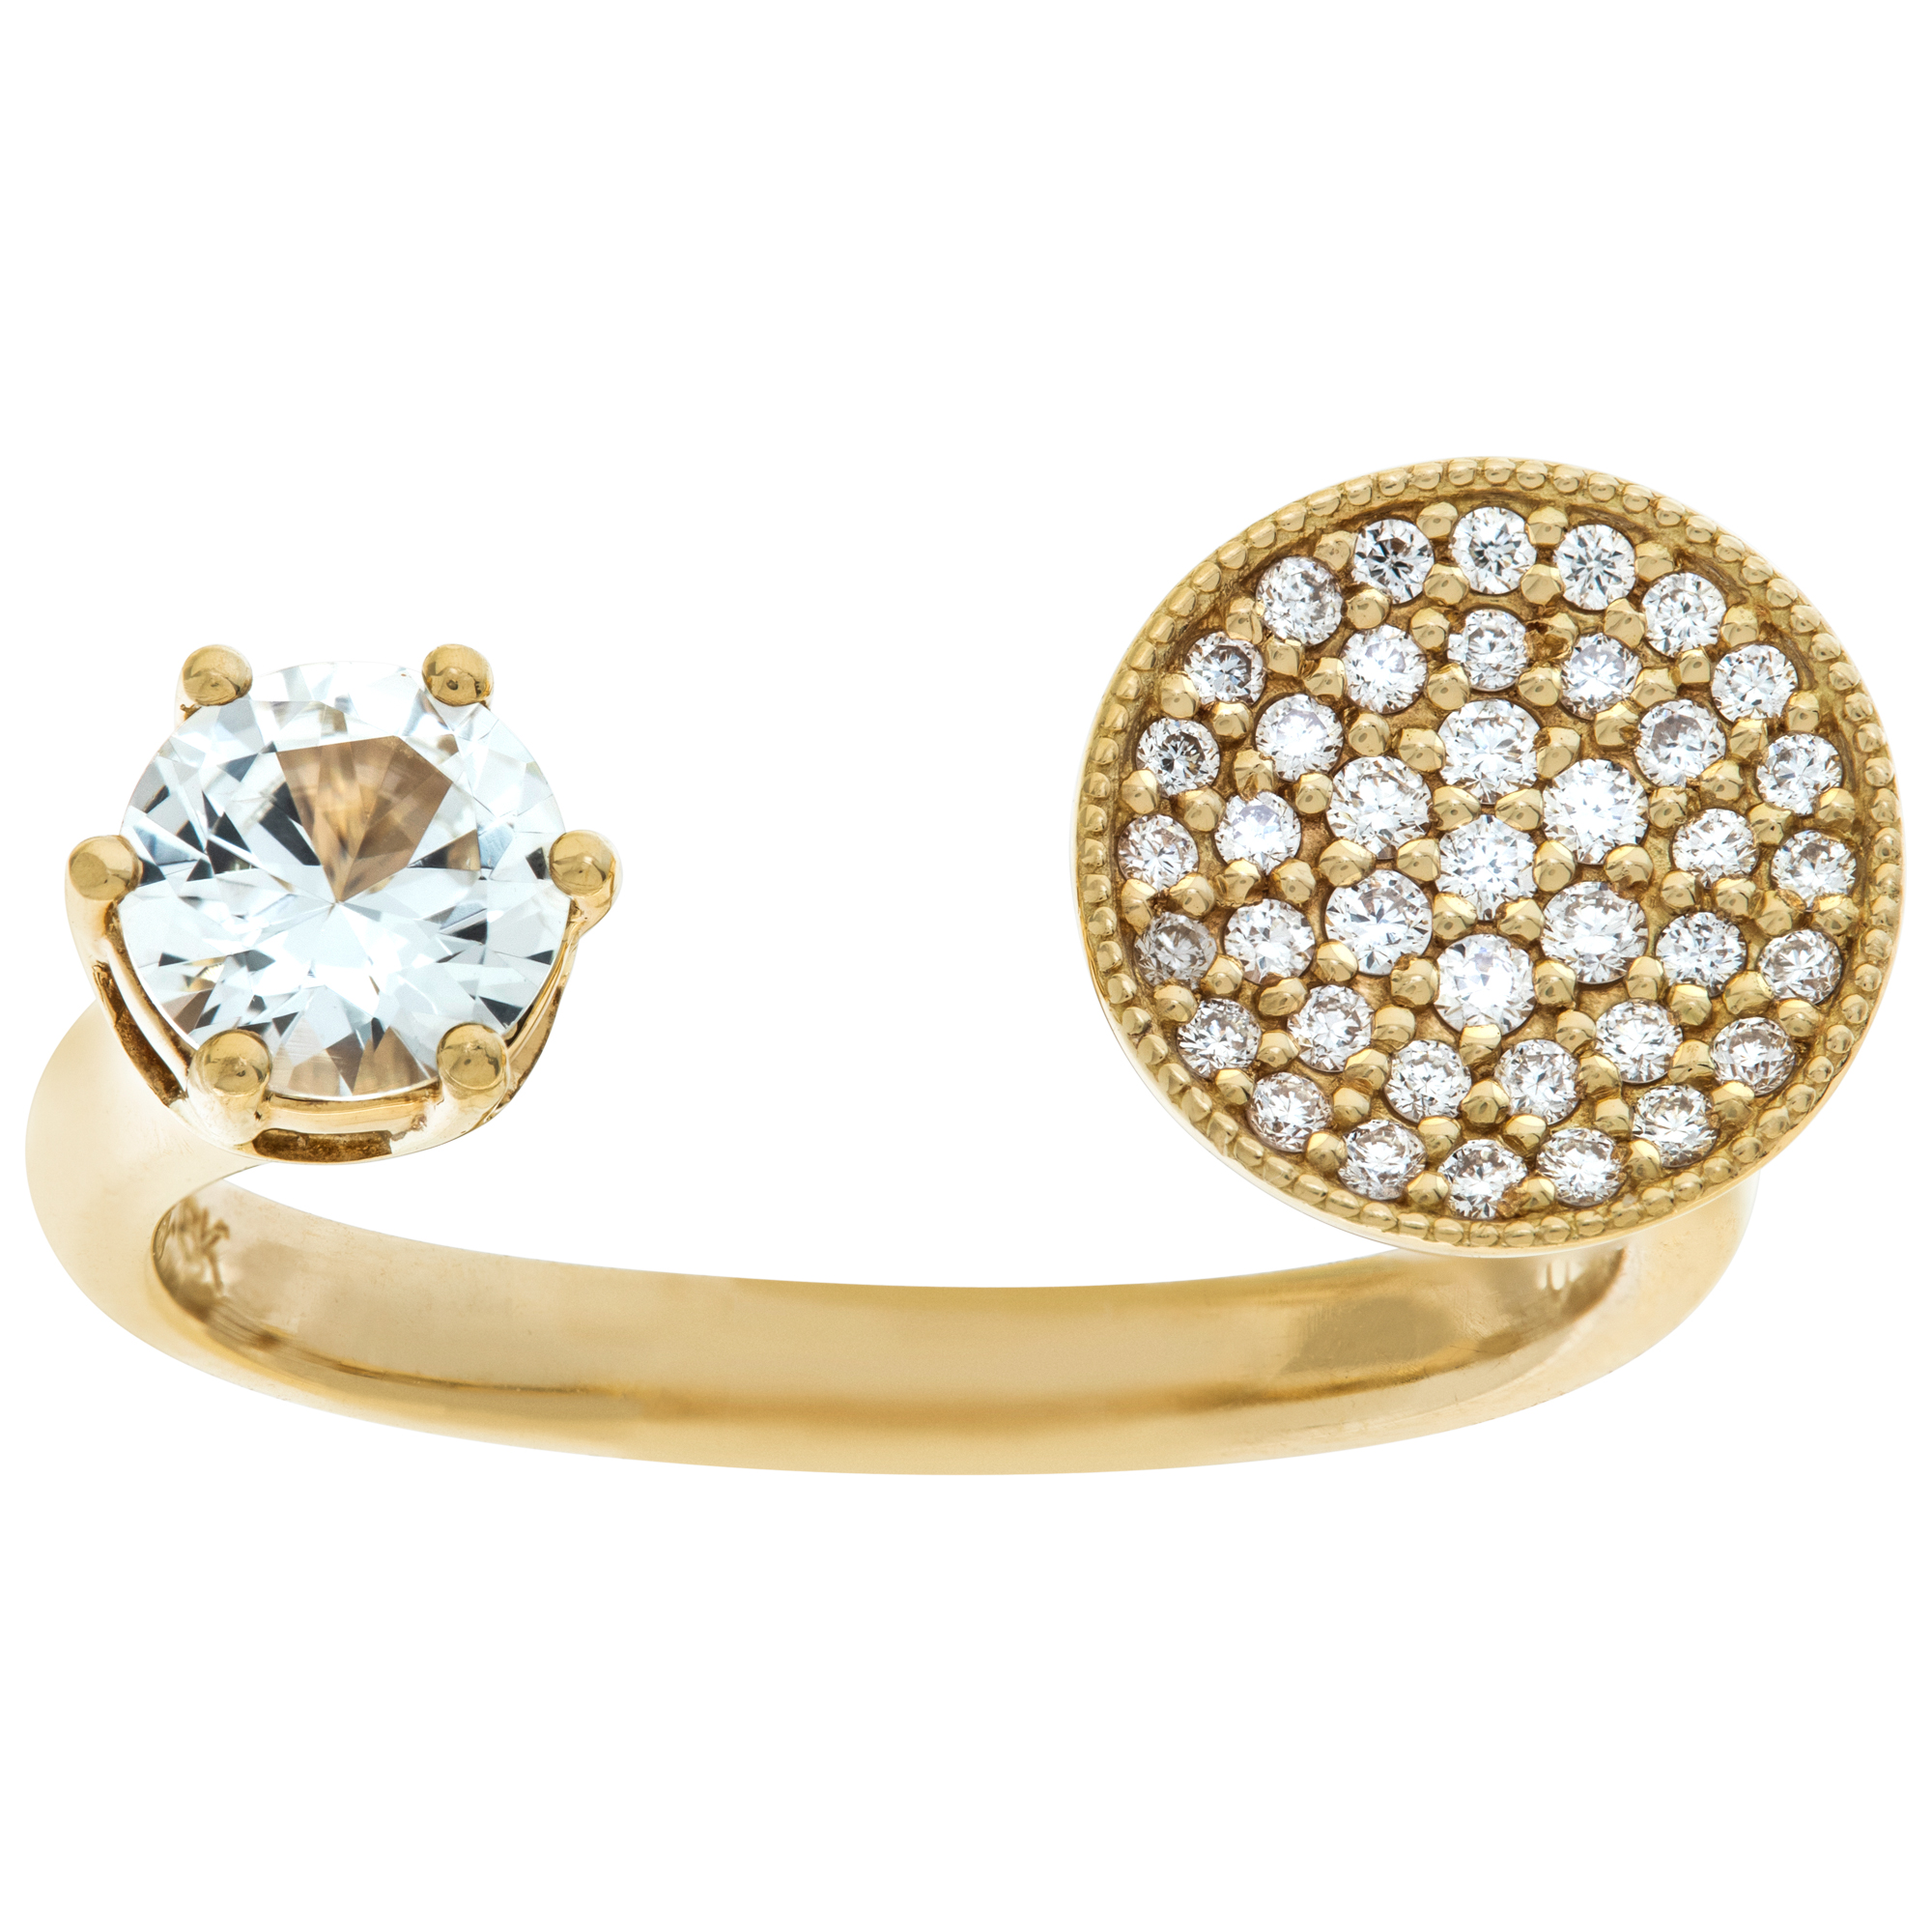 Open ring with white sapphire and diamonds set in 18k gold. 0.29 carats in dia's image 1